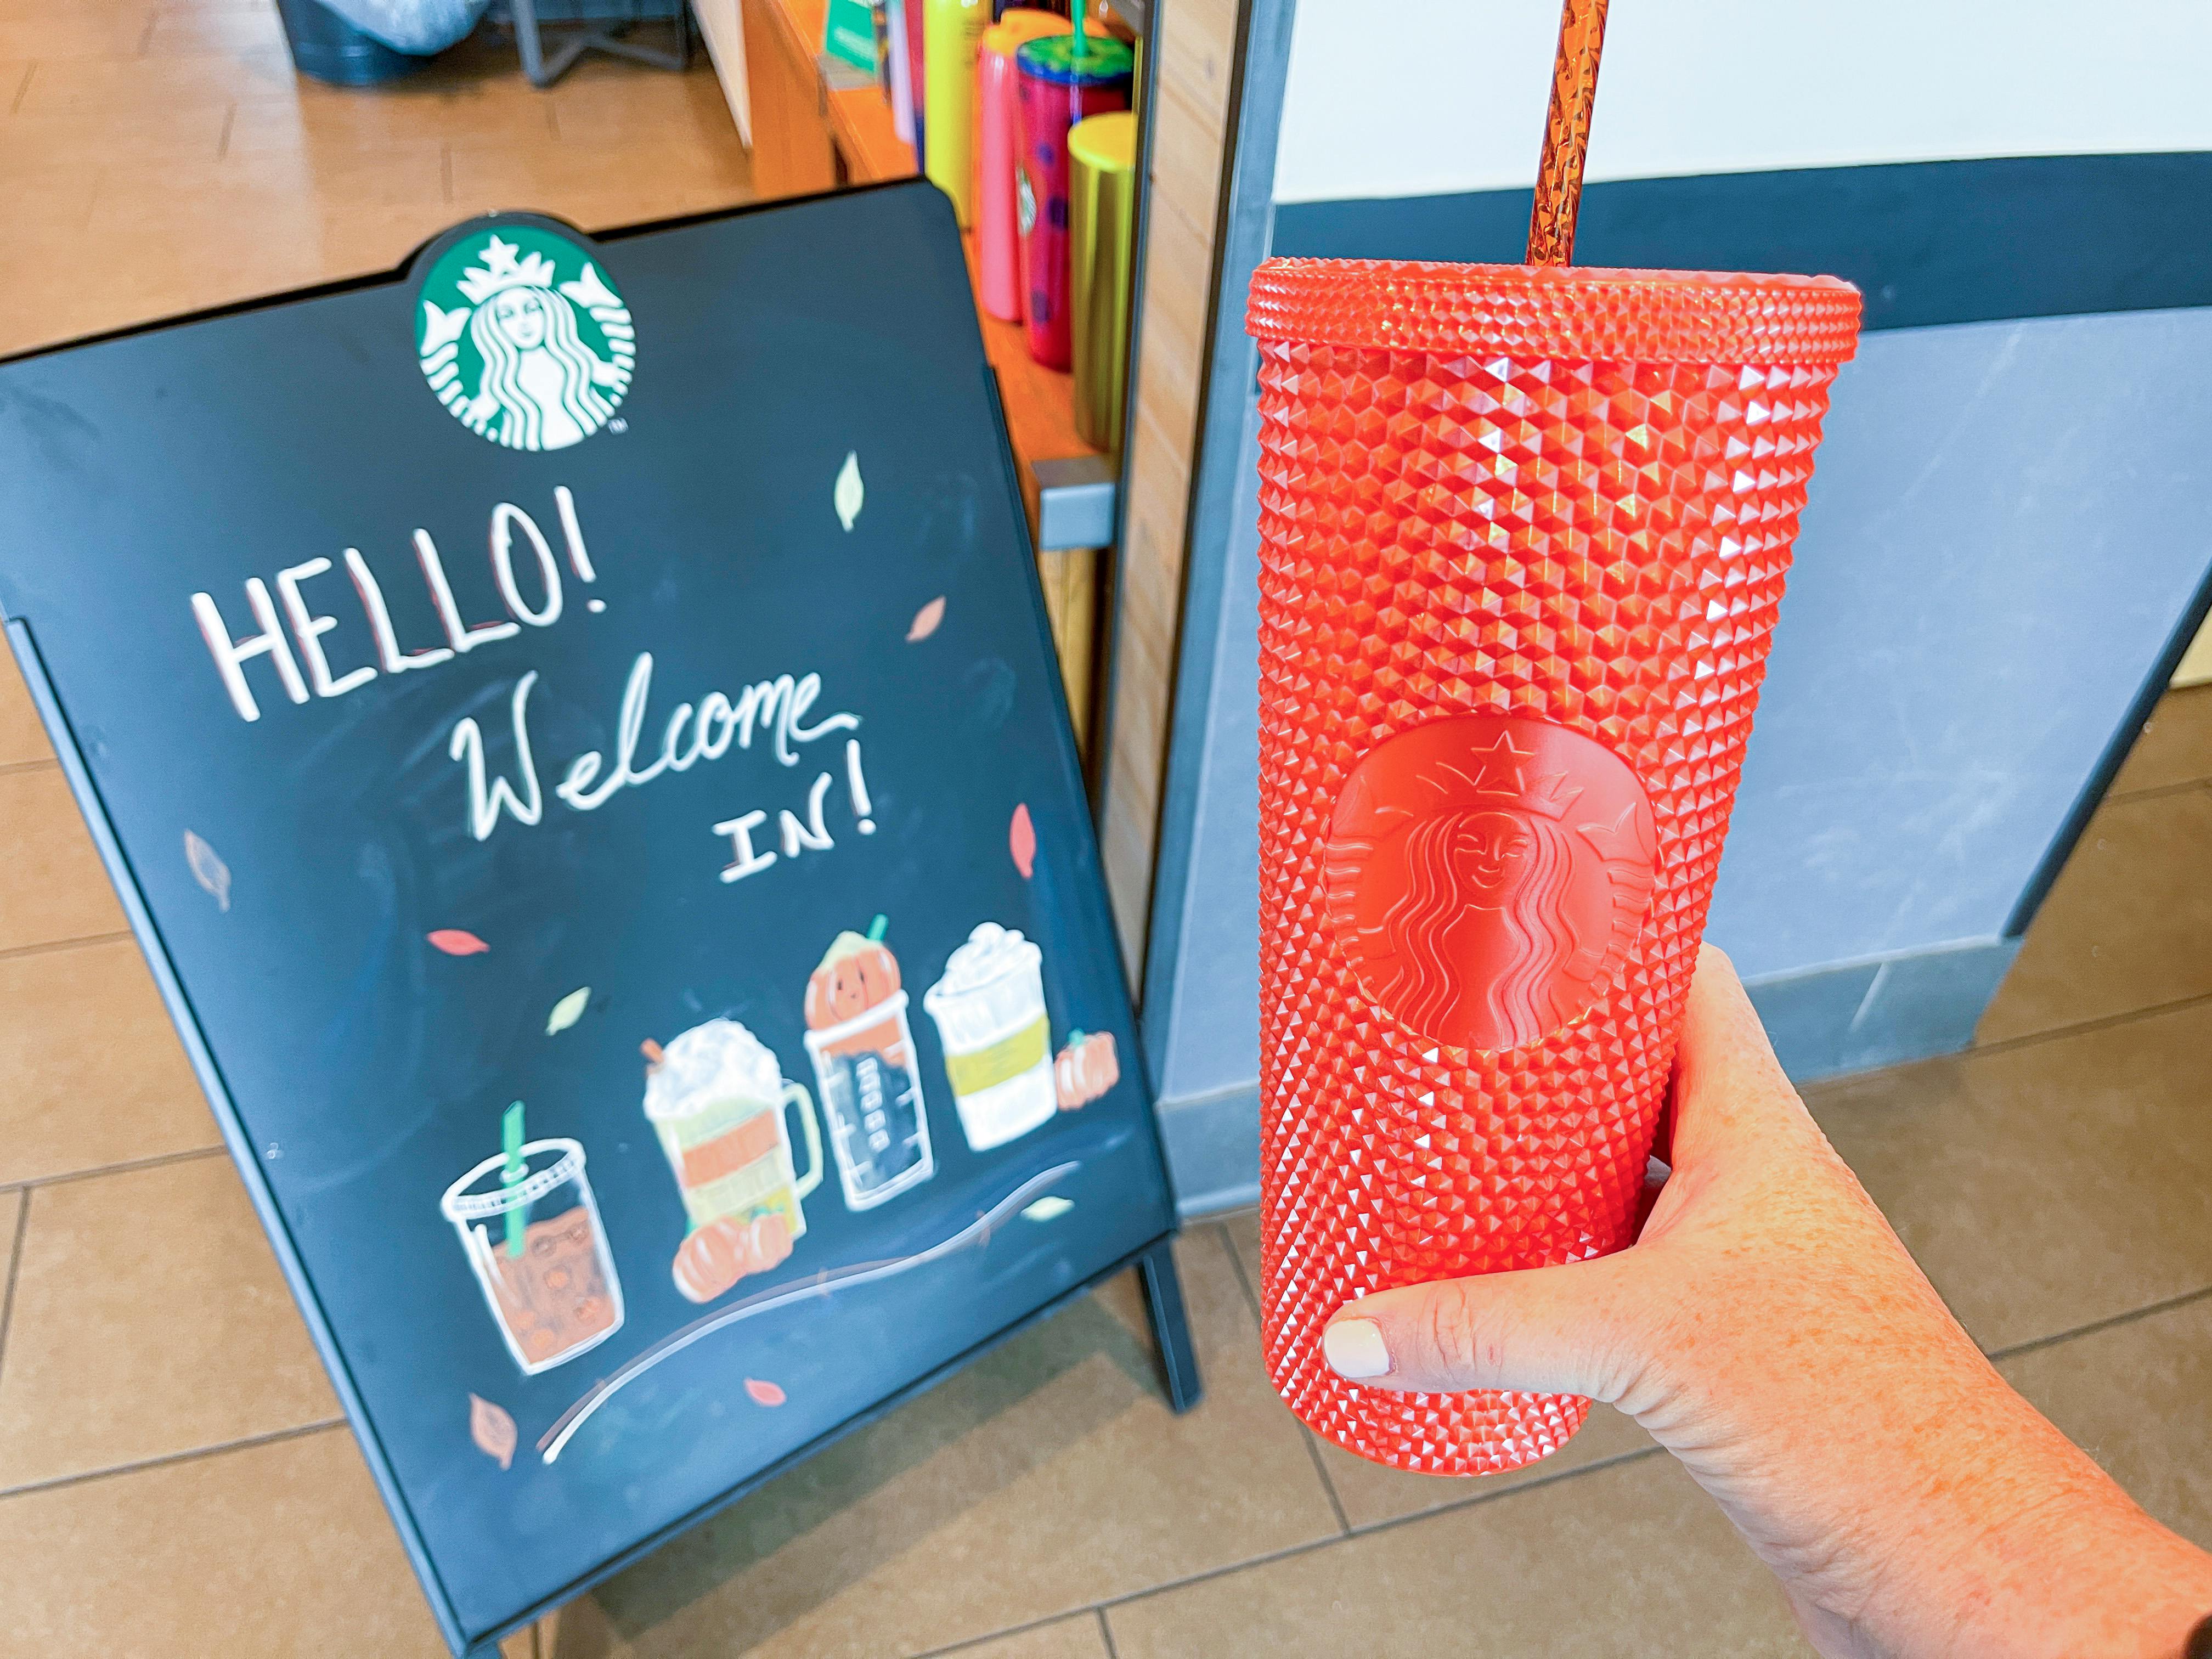 A person holding up a reusable Starbucks cup near a "welcome in" sign.